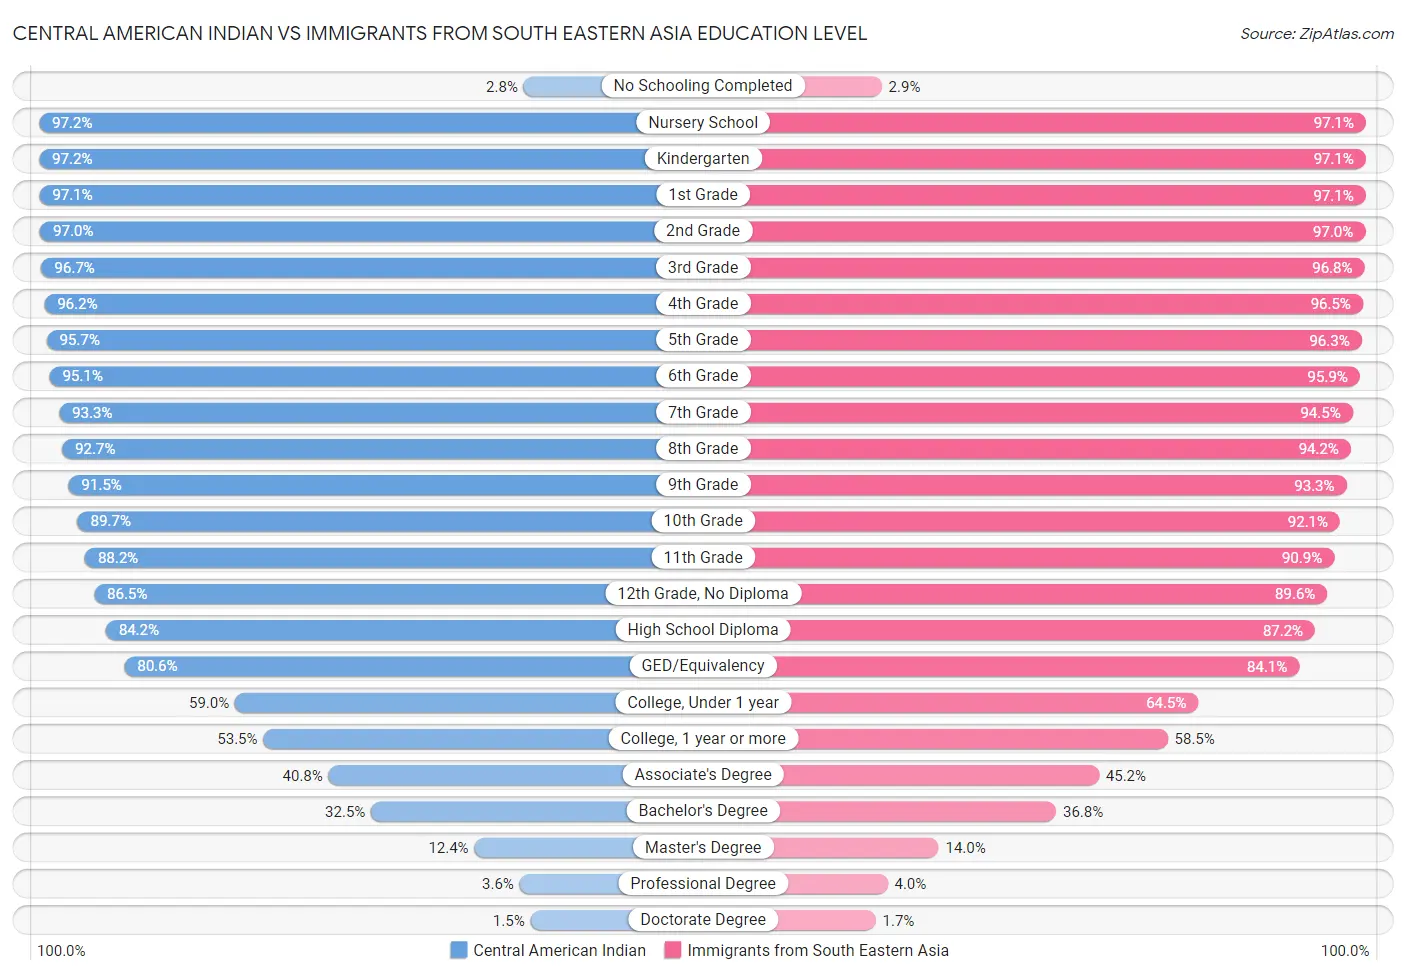 Central American Indian vs Immigrants from South Eastern Asia Education Level